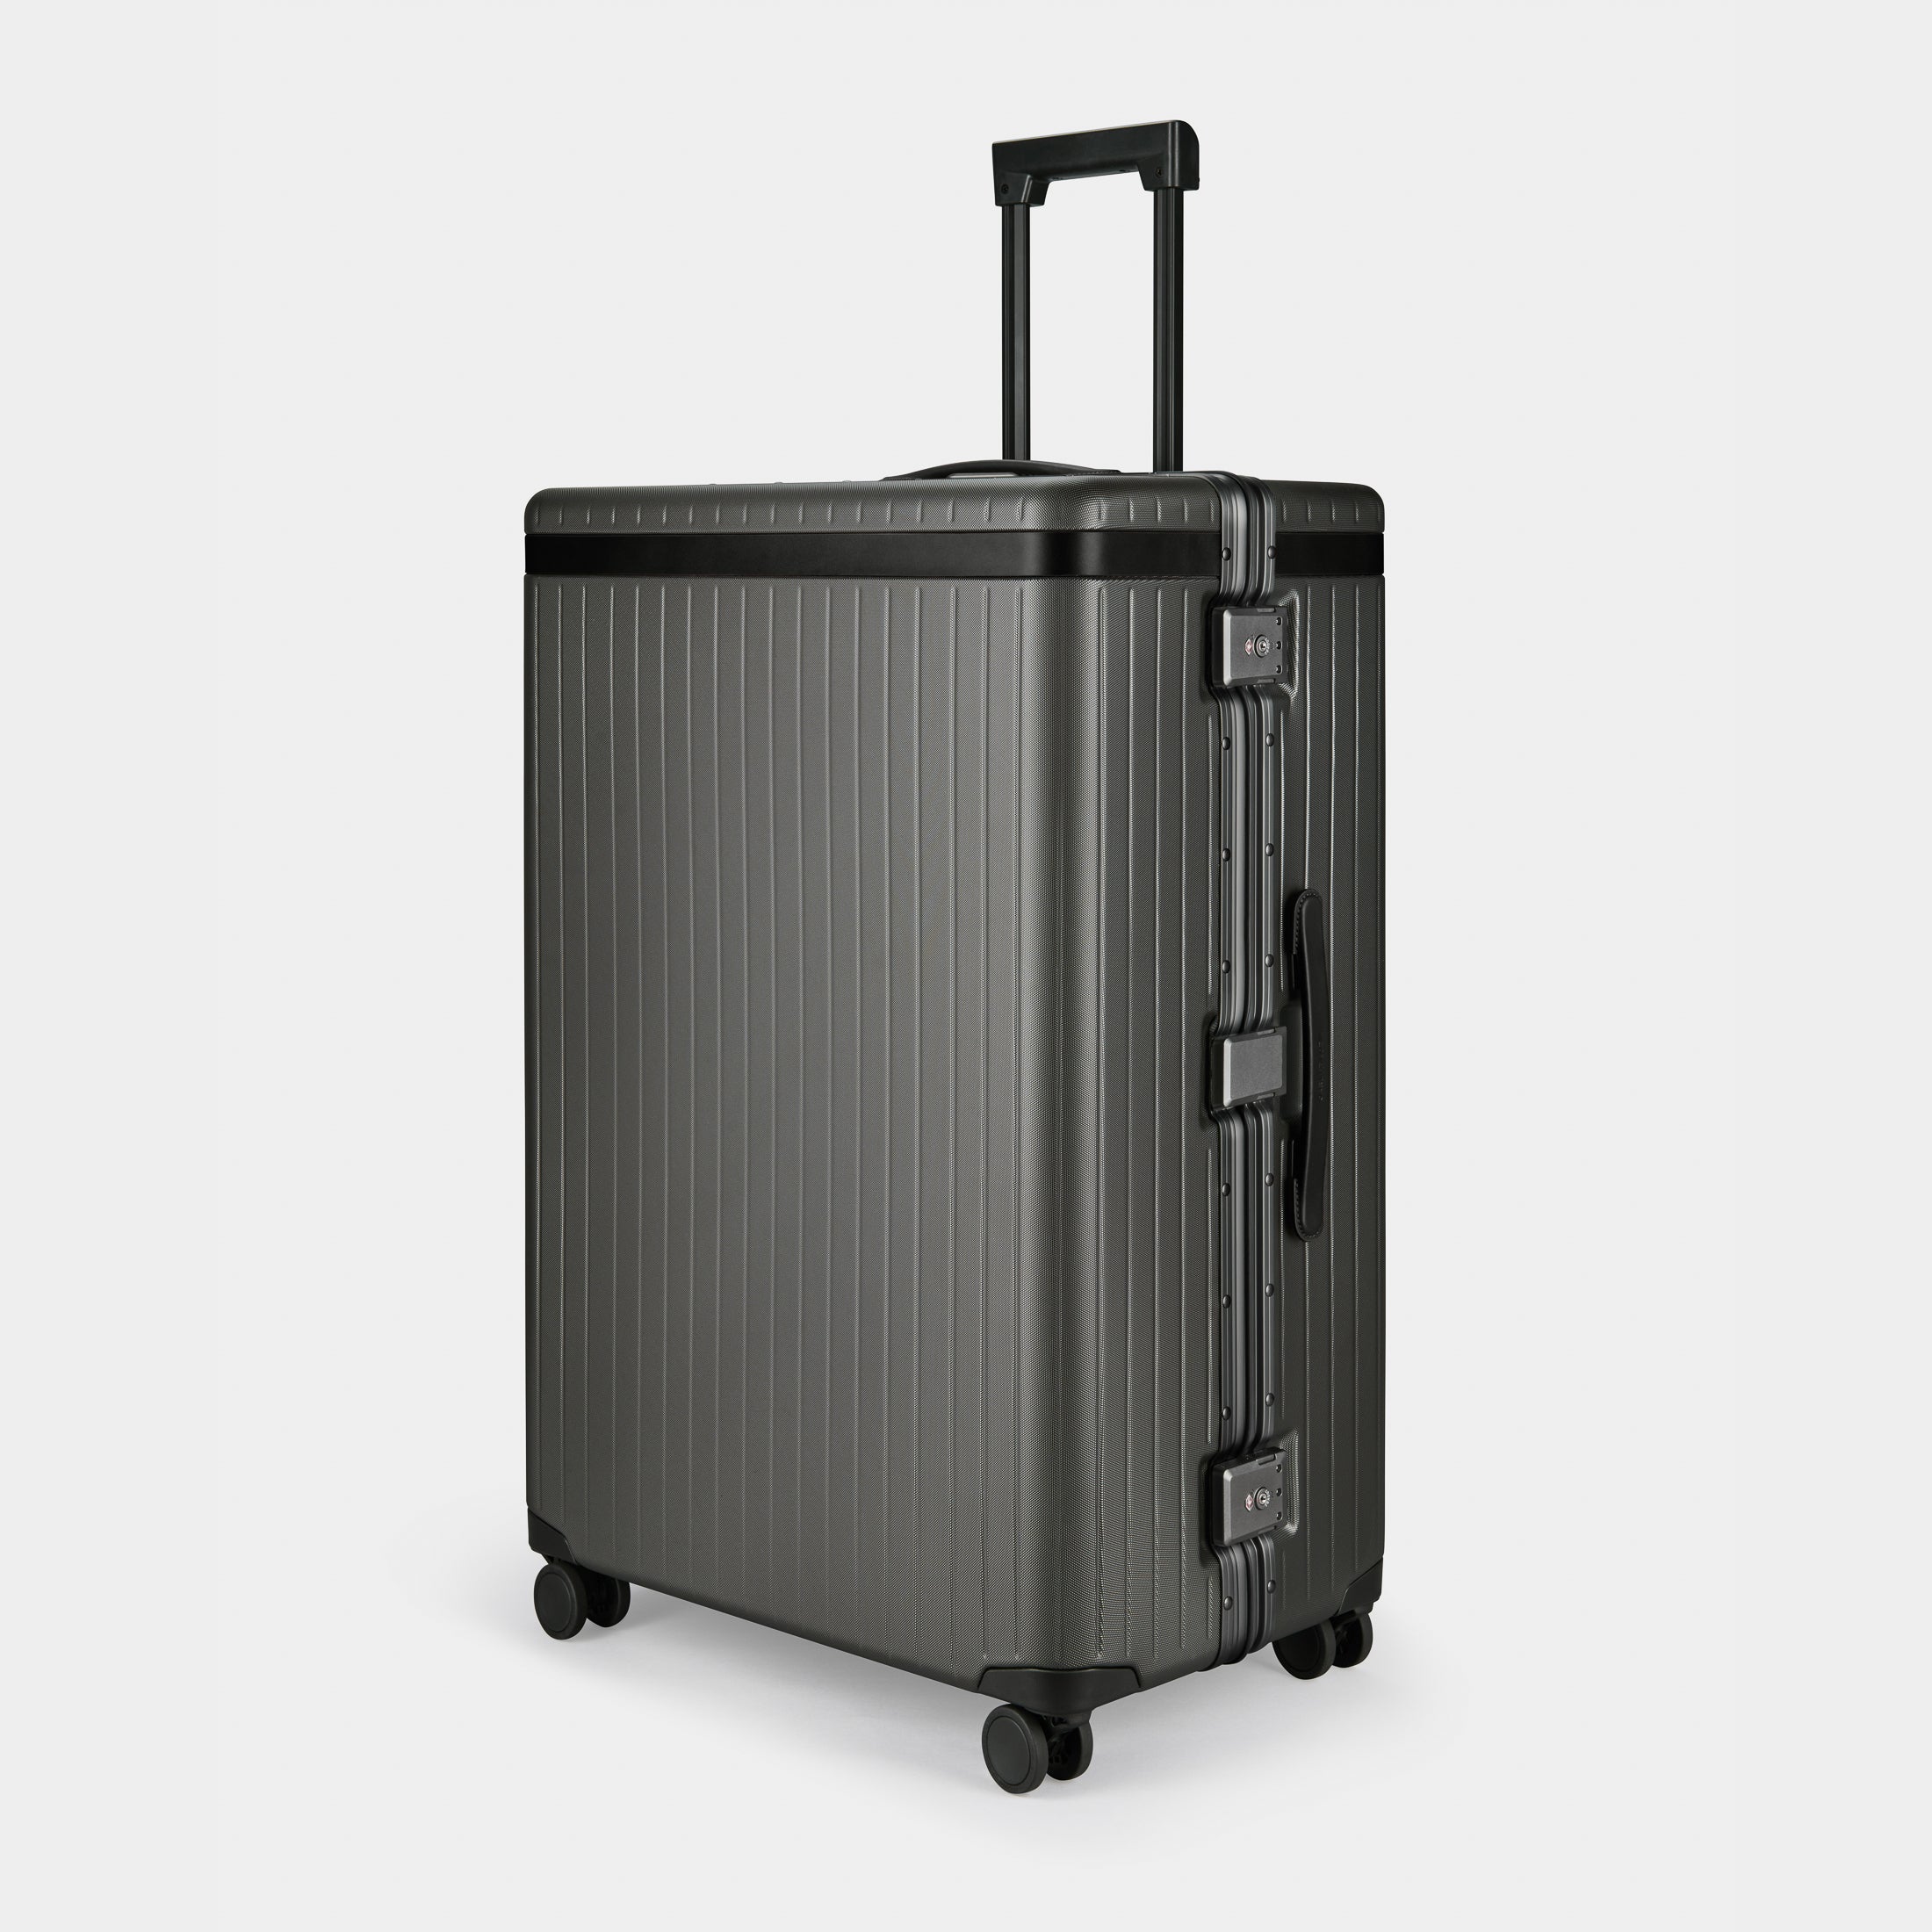 The Large Check-in - Return Grey / Black / Dotted Extra-large hard-shell suitcase